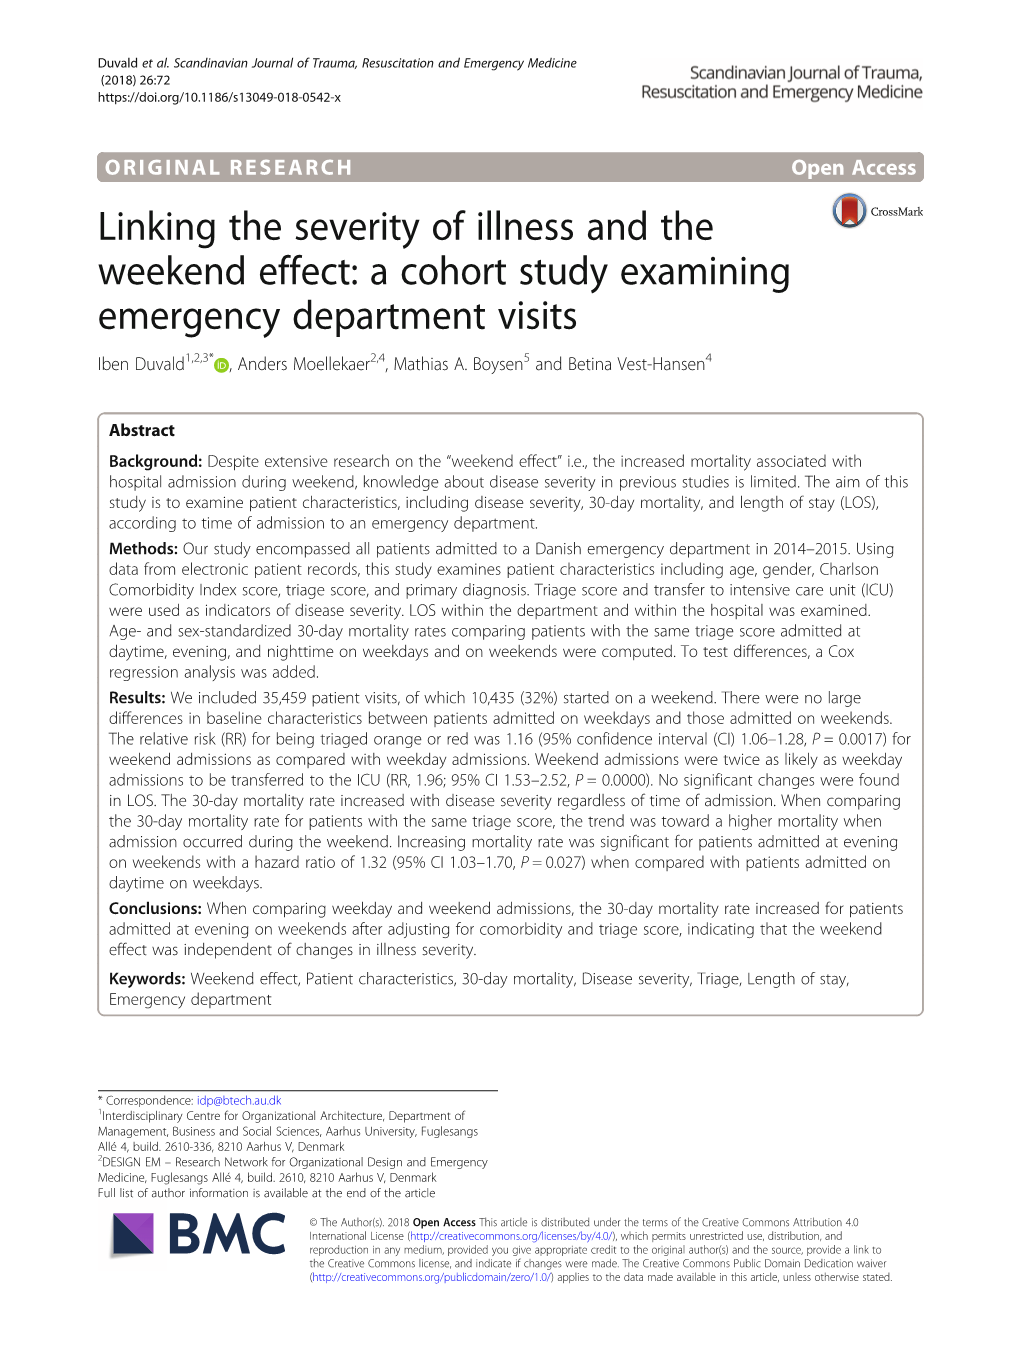 Linking the Severity of Illness and the Weekend Effect: a Cohort Study Examining Emergency Department Visits Iben Duvald1,2,3* , Anders Moellekaer2,4, Mathias A